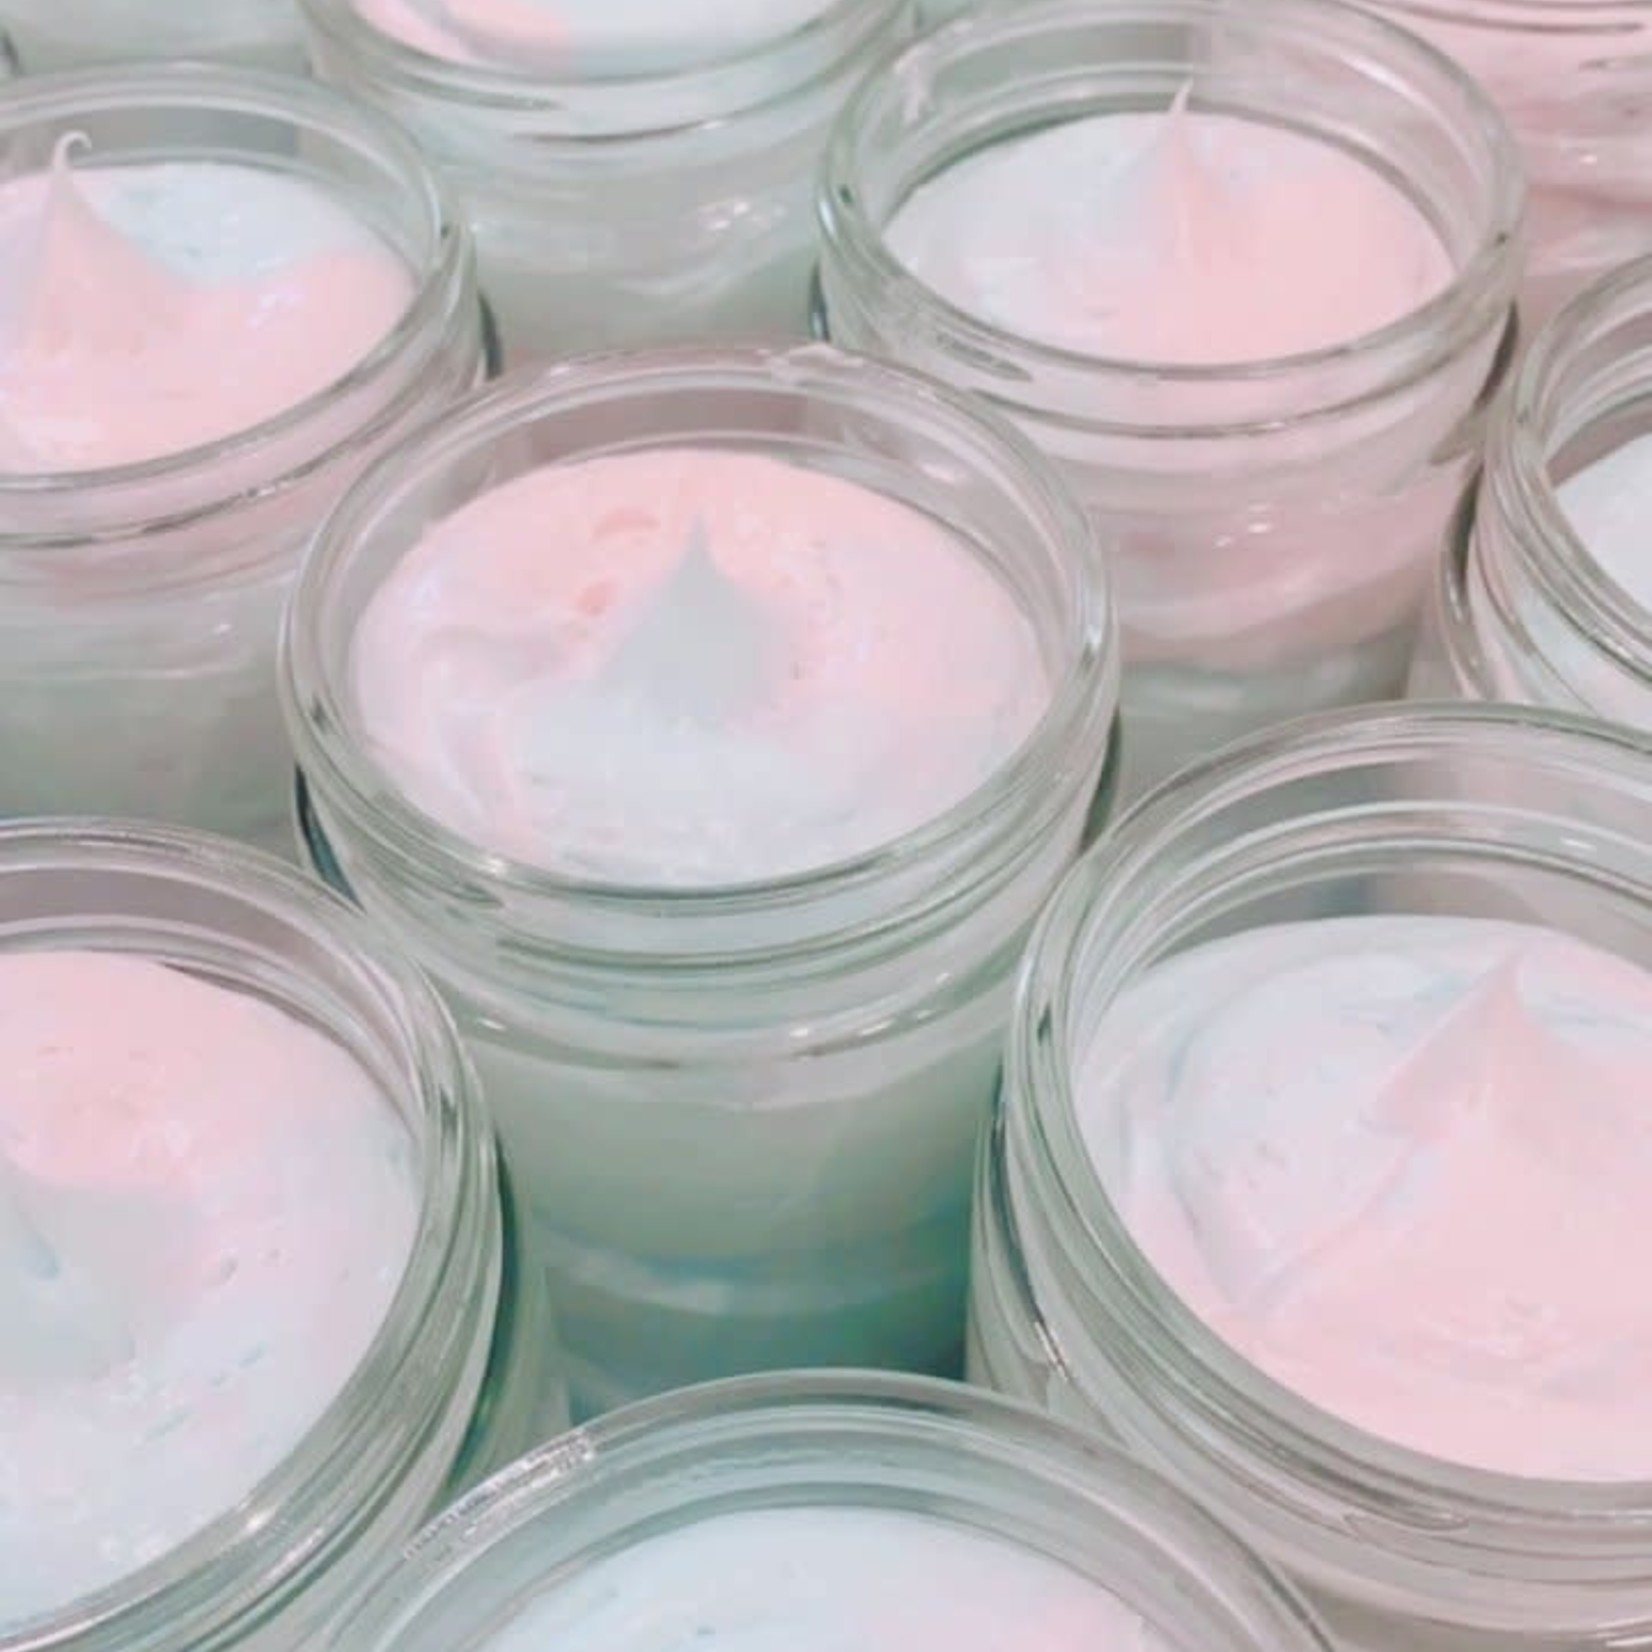 Caprice & Co Body Butter